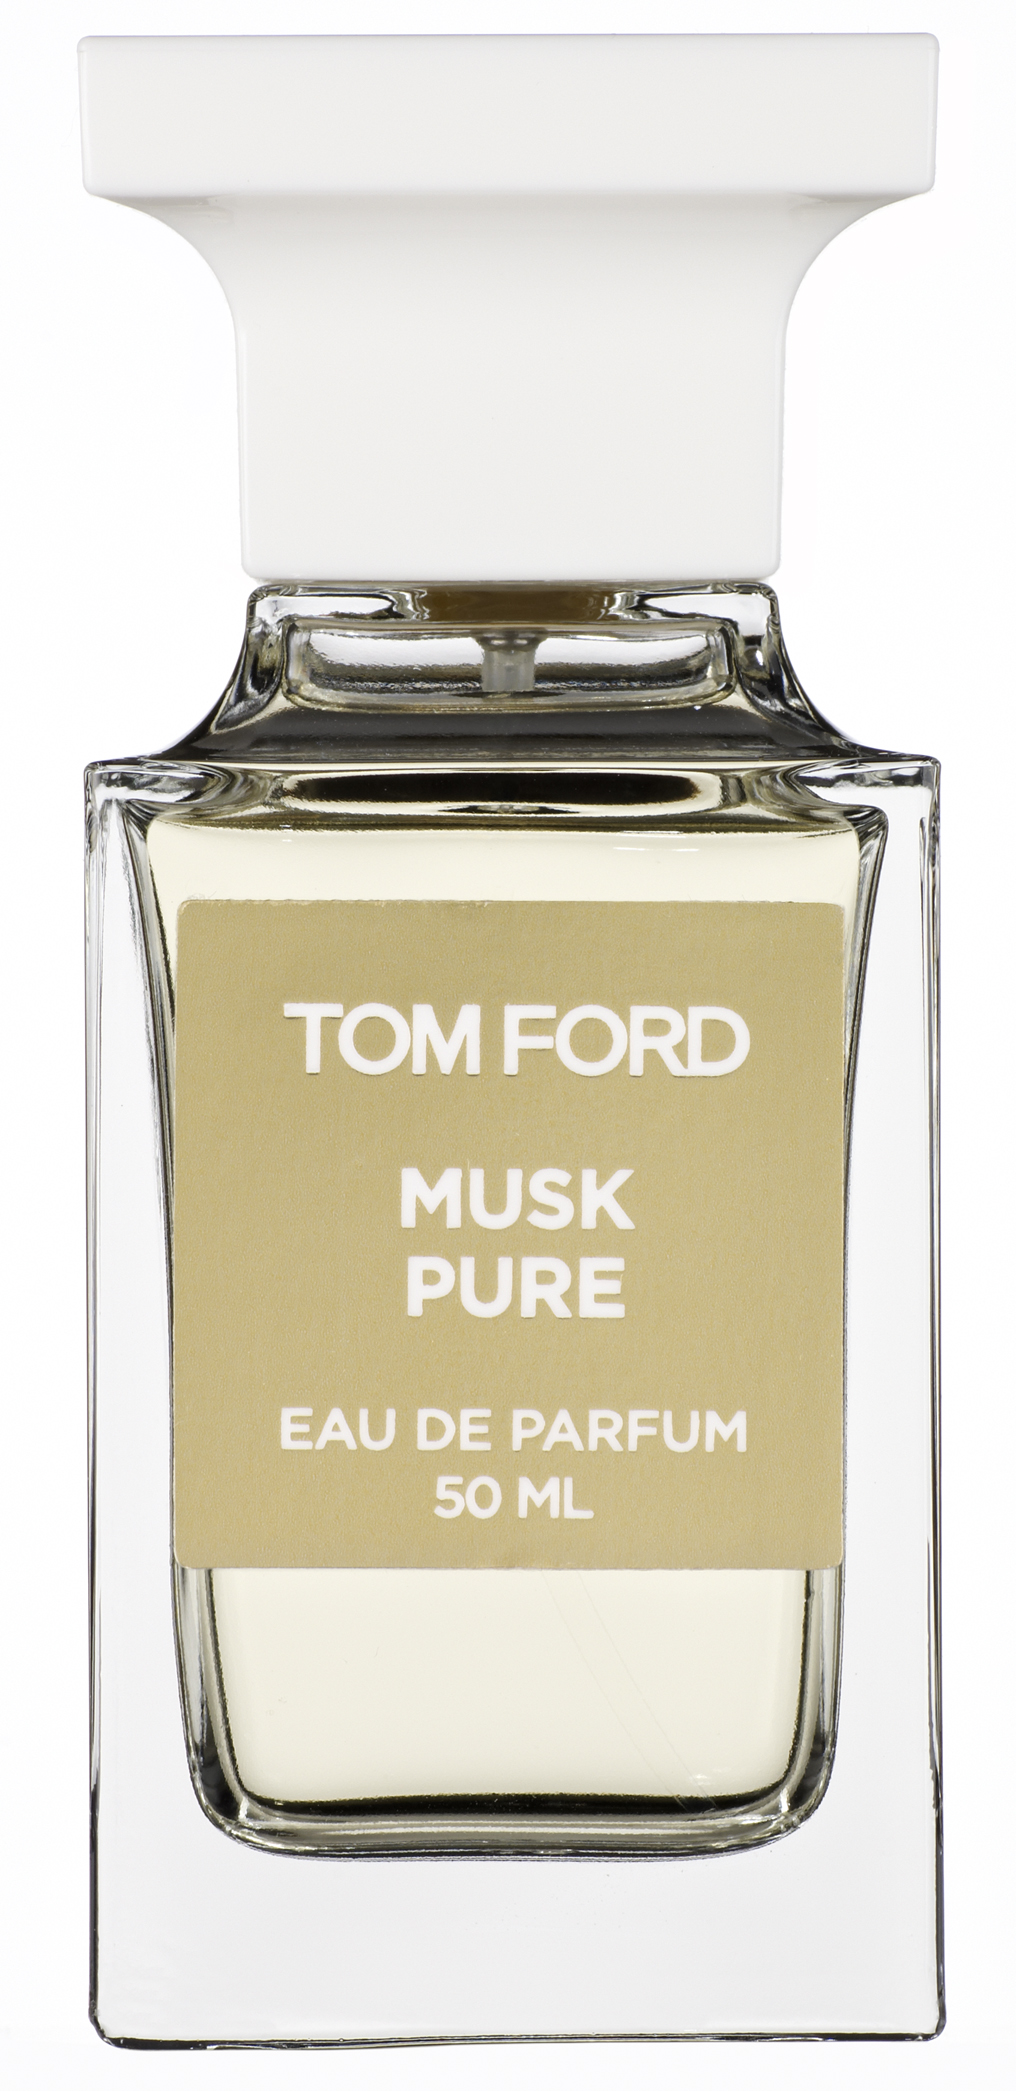 Tom ford musk pure basenotes #2